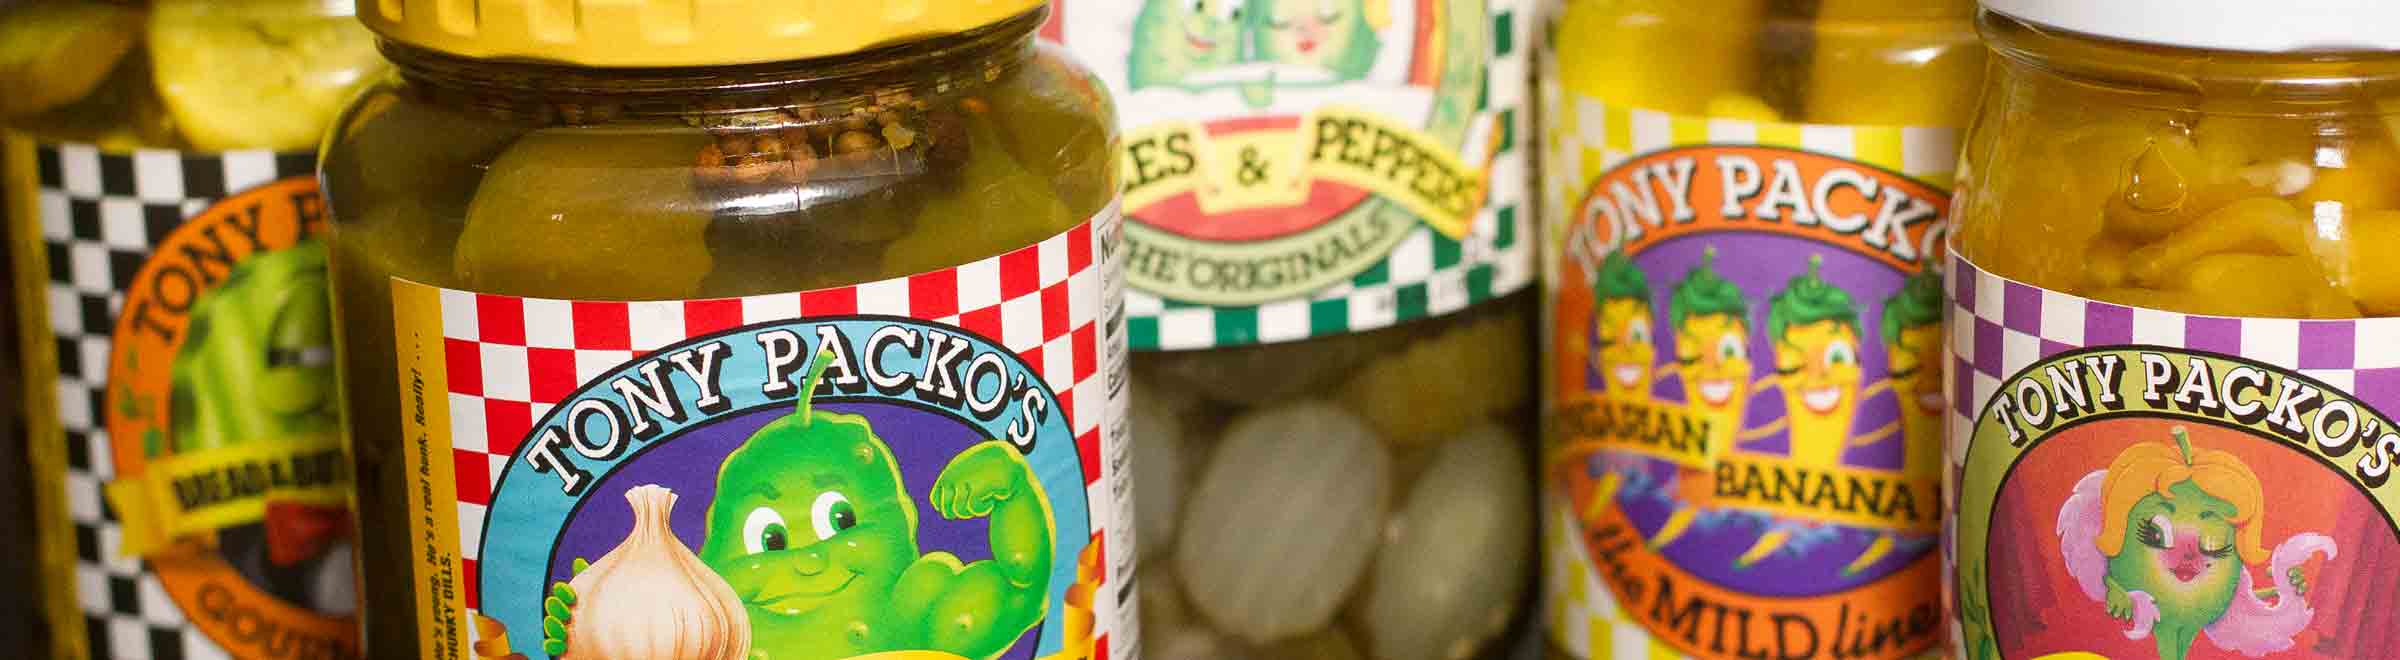 Close up of 5 jars of a variety of Tony Packos Pickles and Peppers